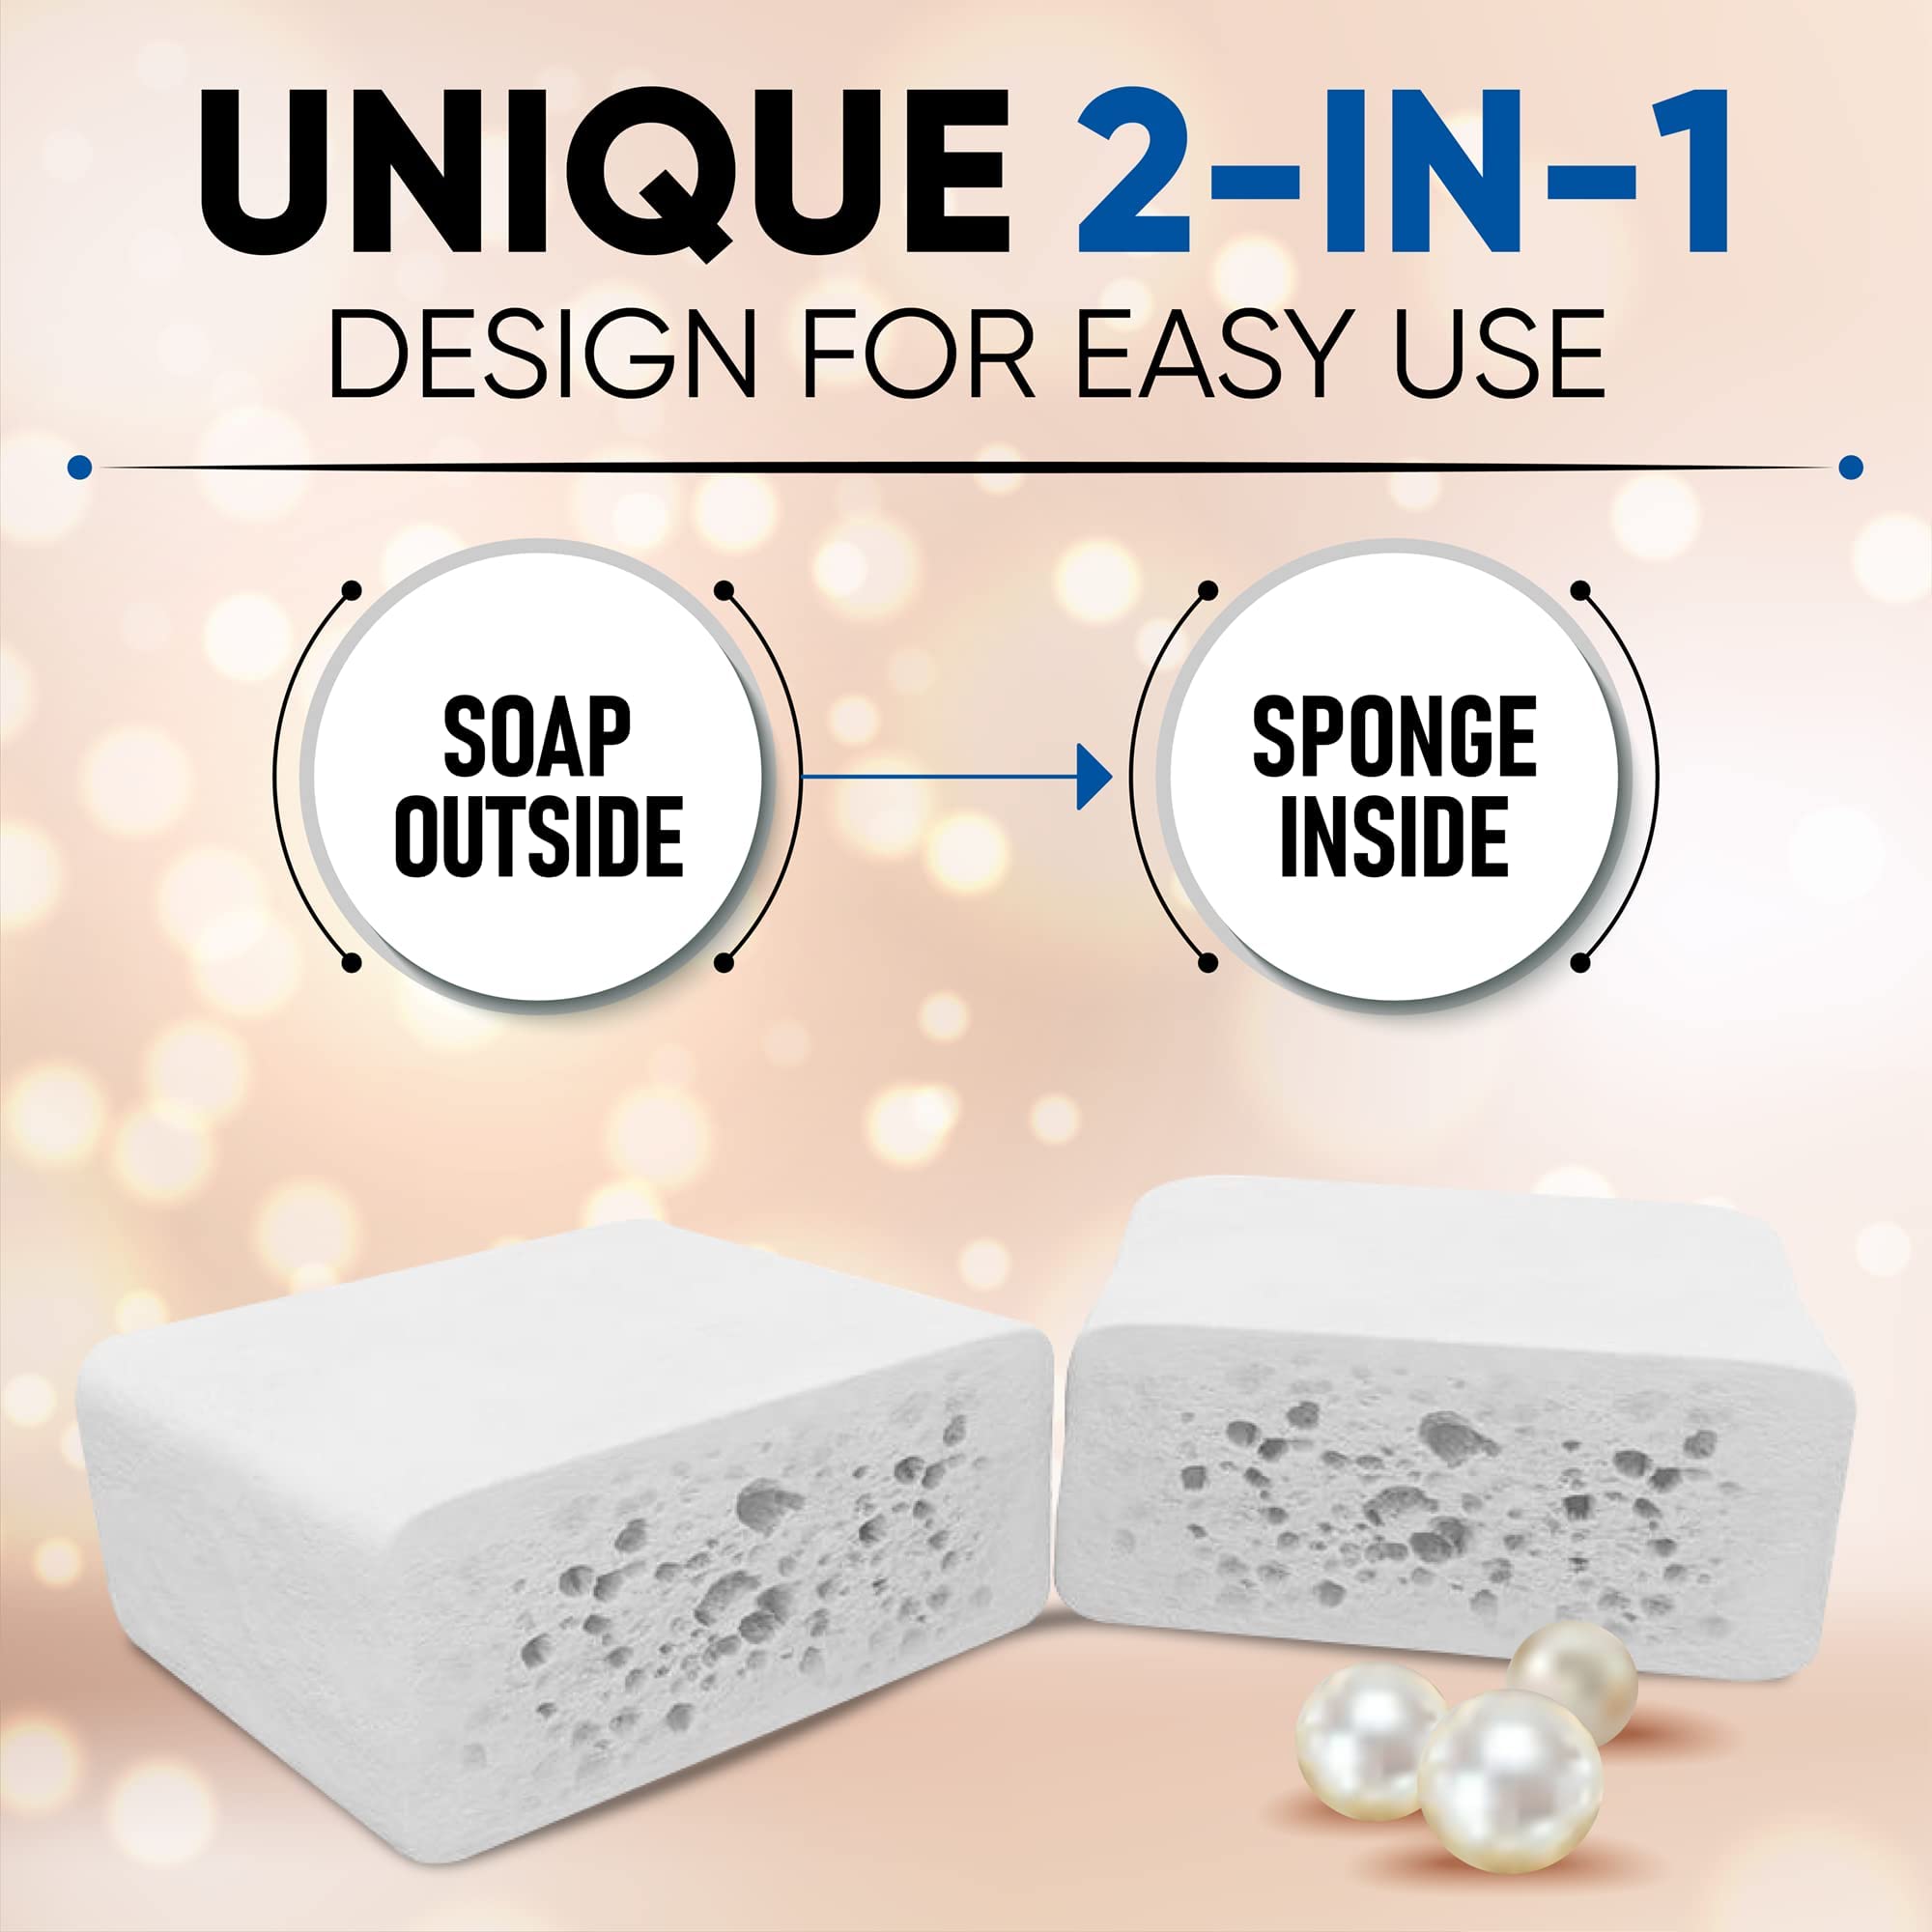 T.Taio Esponjabon Mother of Pearl Soap Sponge - Cleansing Shower Scrubber - Cleaning Bath Wash Scrub - Oil Removal - Massage & Lather Foot, Elbow, & Face - Bathroom Accessories (2-Pack)